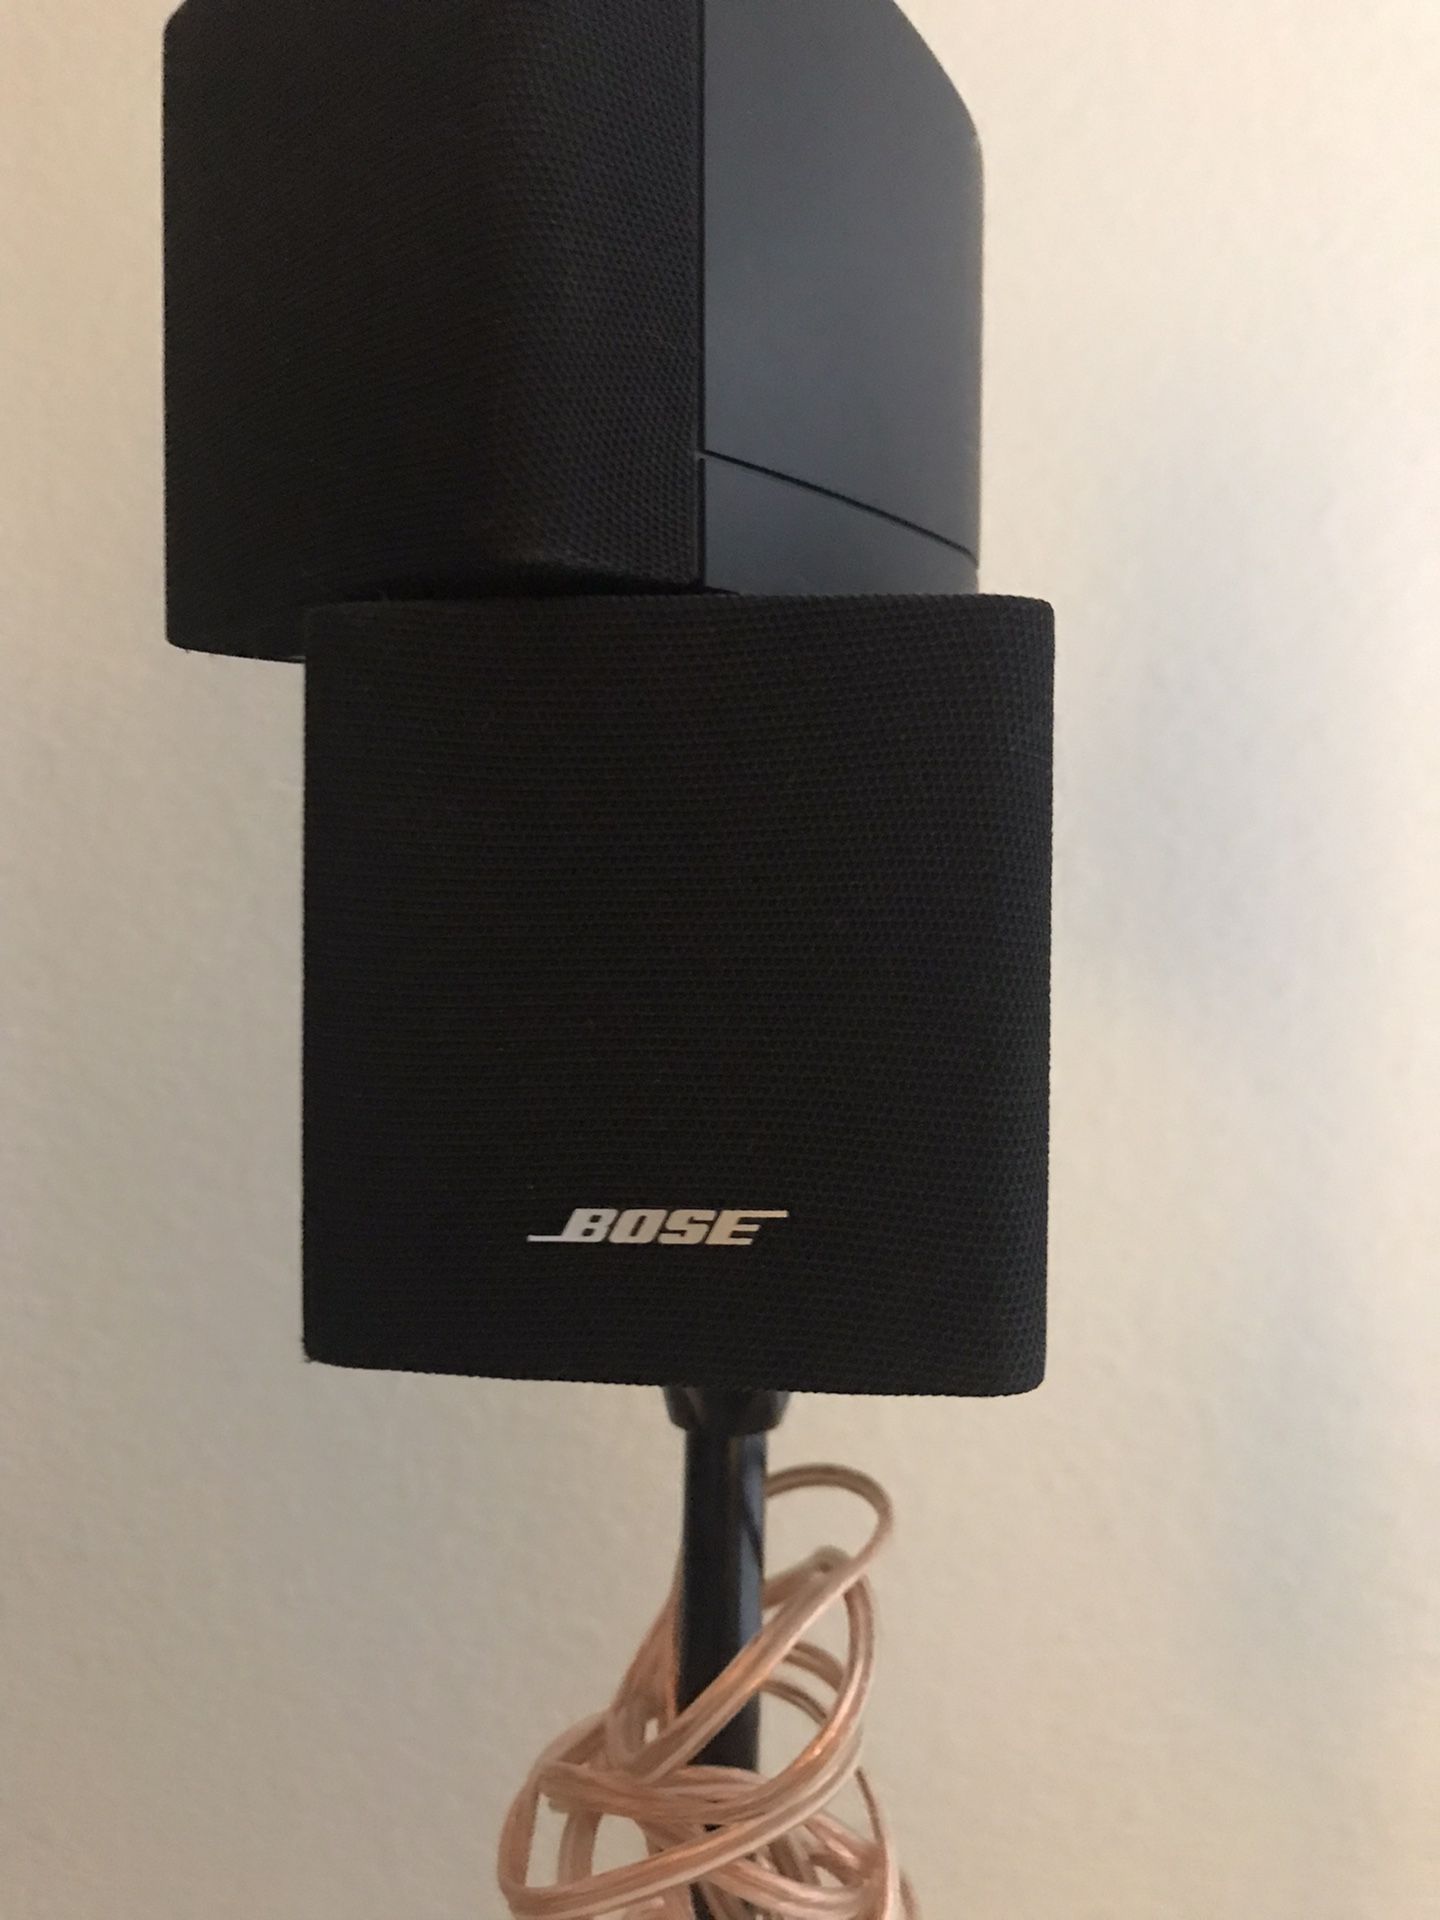 Two Bose Speakers 